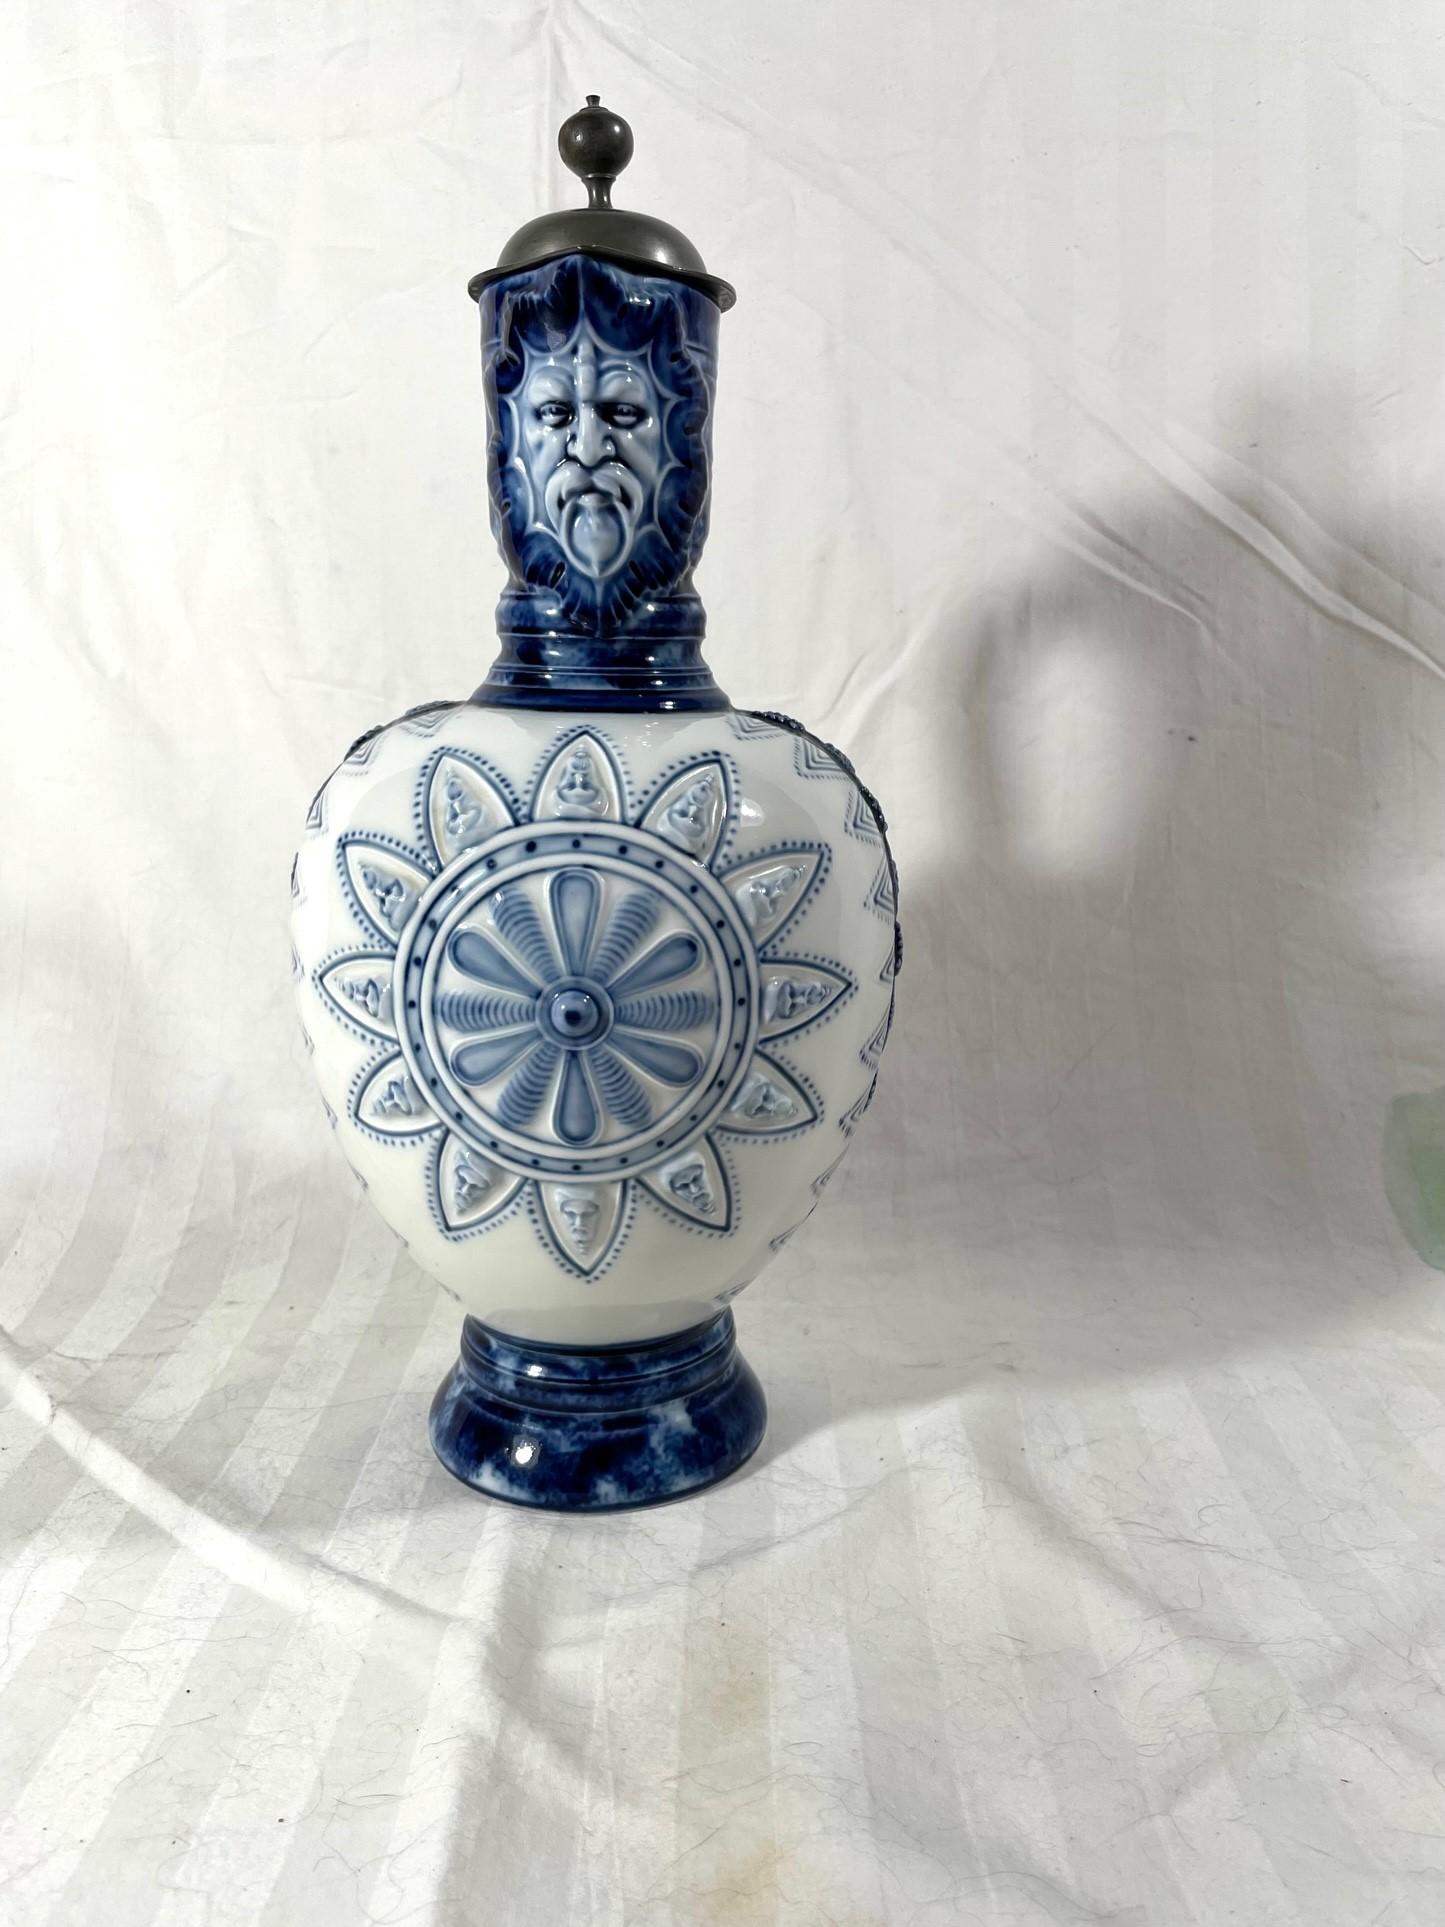 Antique German KPM Porcelain Lidded Bartmann Jug Tankard.

19th century German Bellarmine Bartmann jug with bearded man from the Porcelain Manufactory KPM Berlin. Jugs like this are also known as narrow necked jugs or German Enghalskrug. It has a